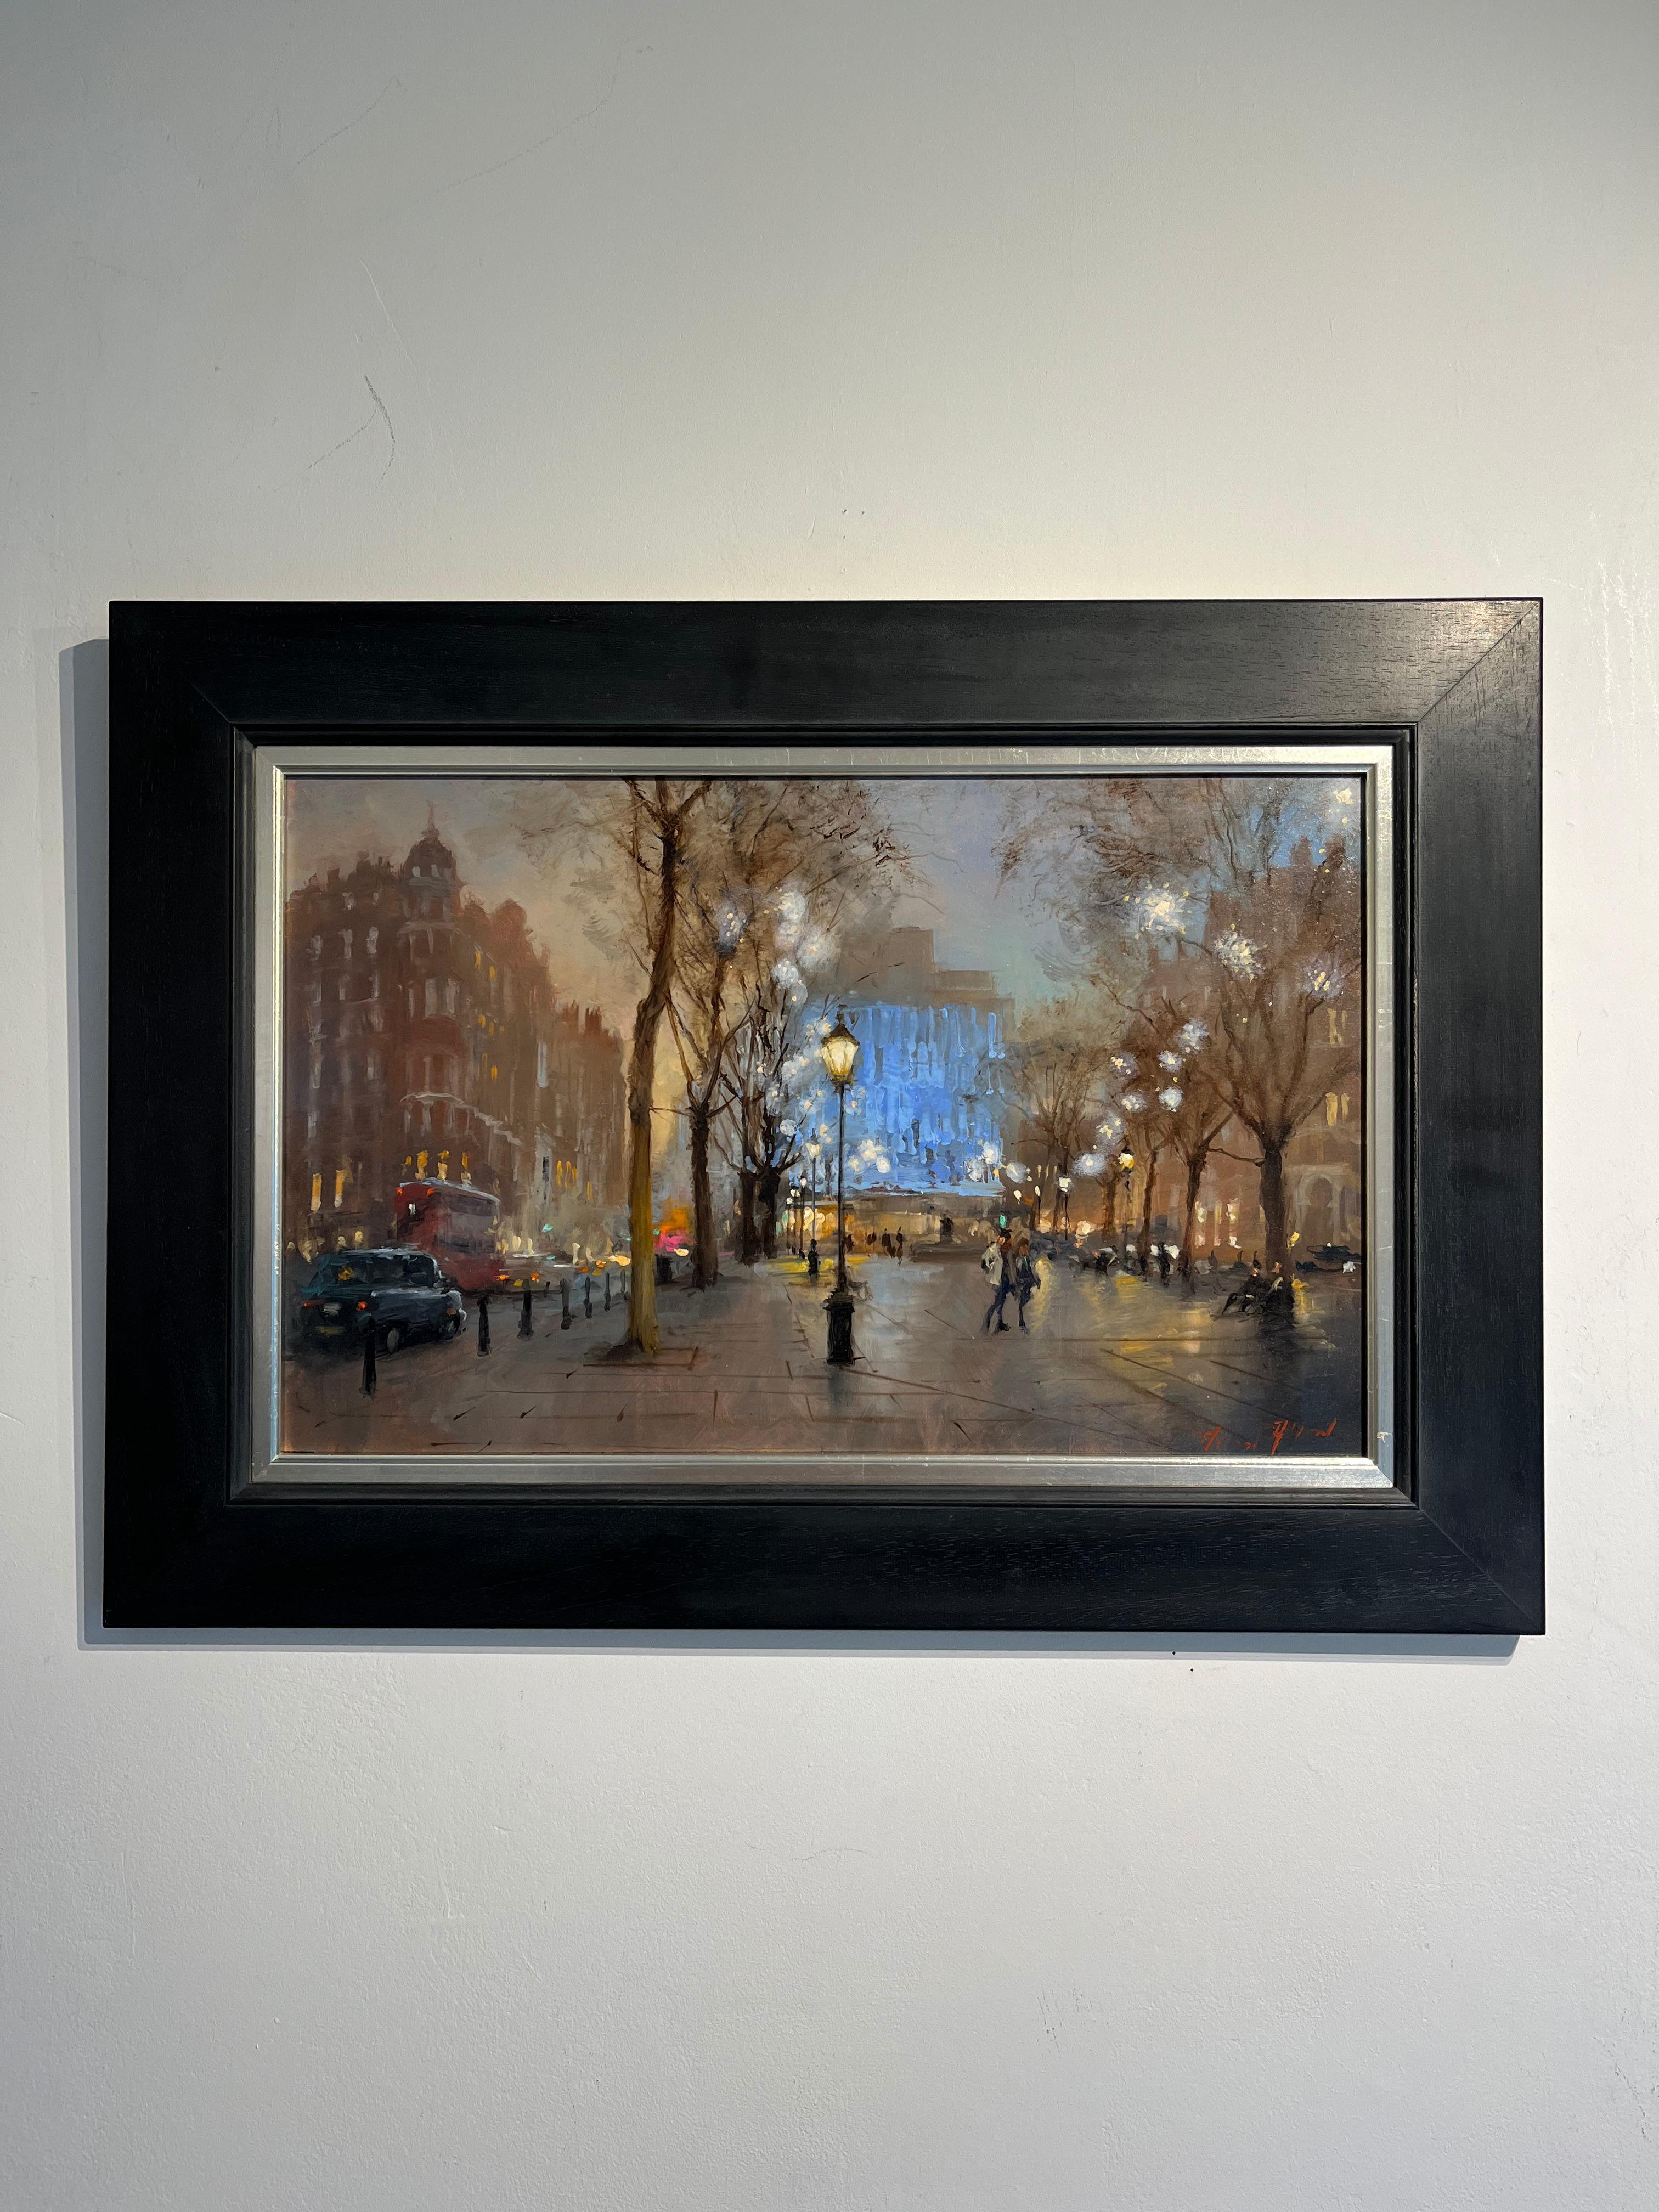 Sloane Square - London architecture impressionist oil painting impasto artwork - Painting by Michael Alford